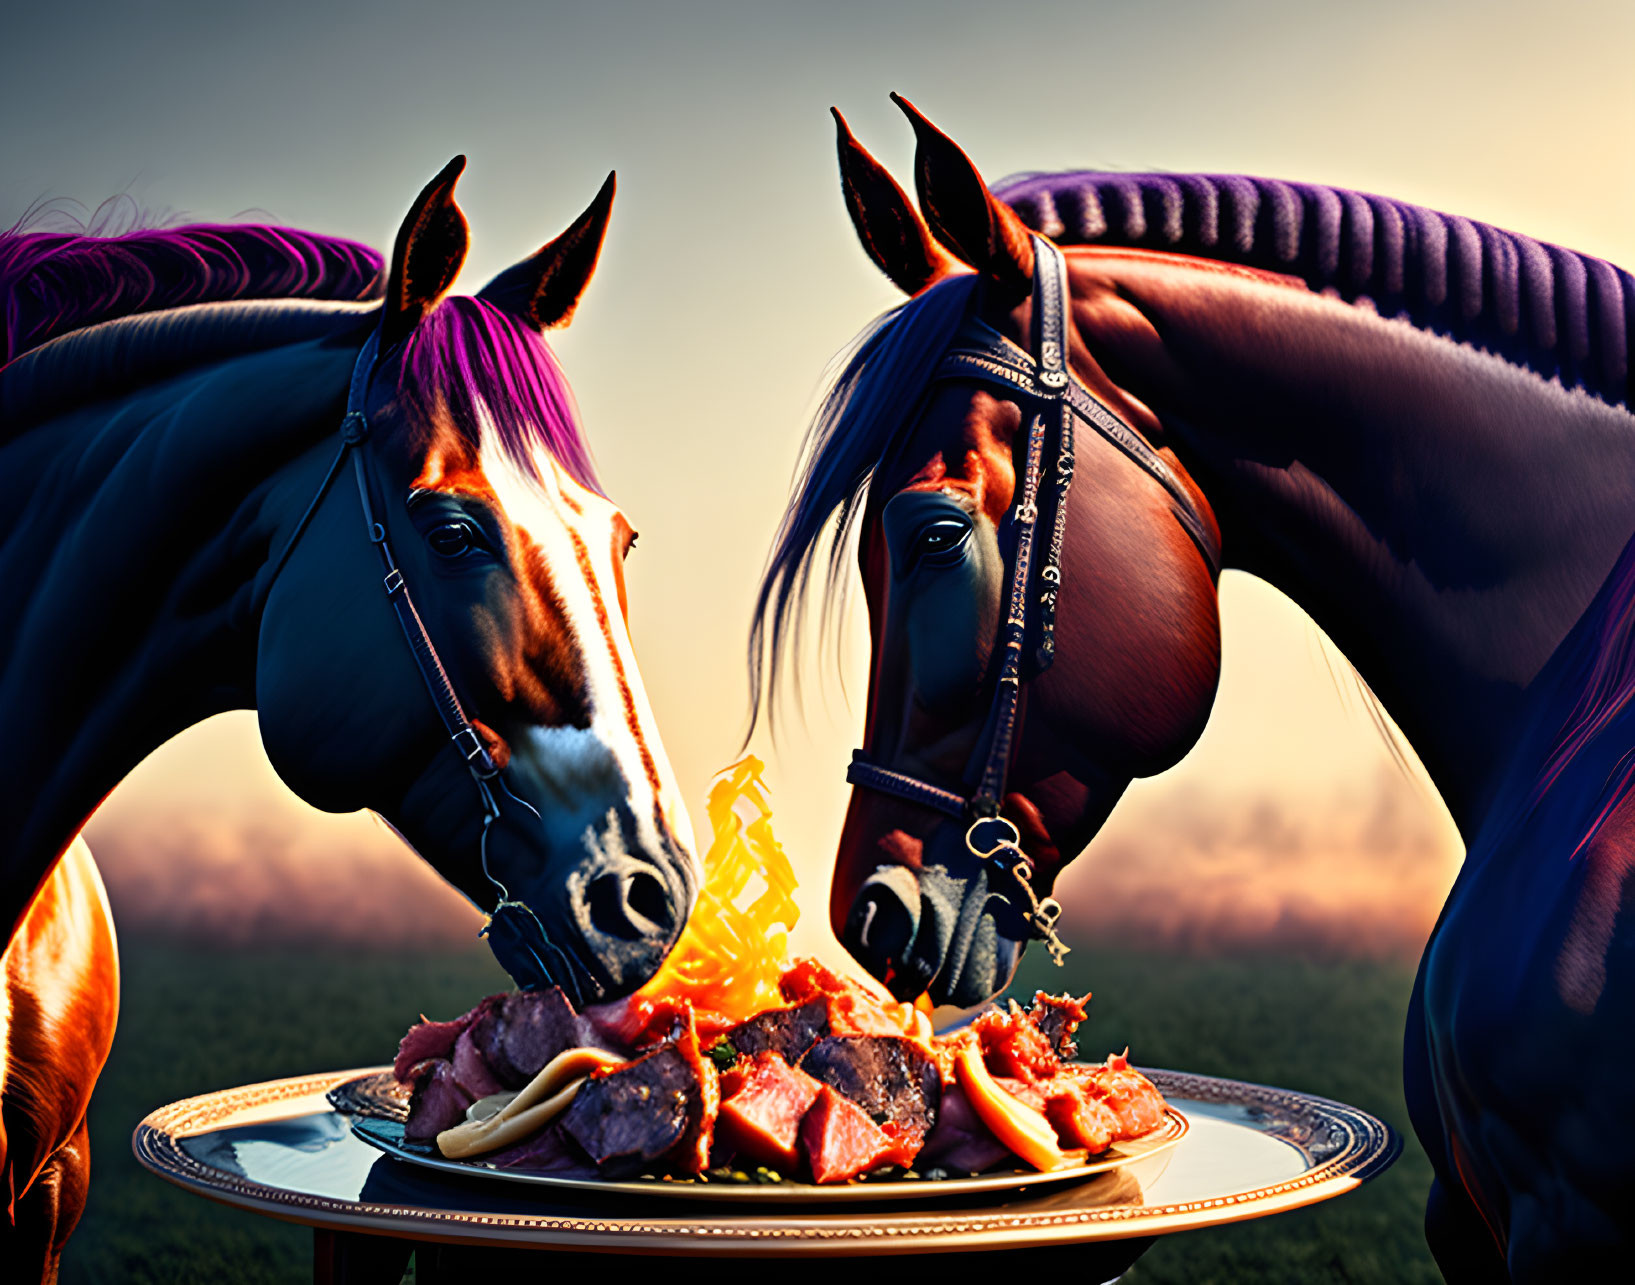 Two Horses Sharing Grilled Meat Platter at Dusk